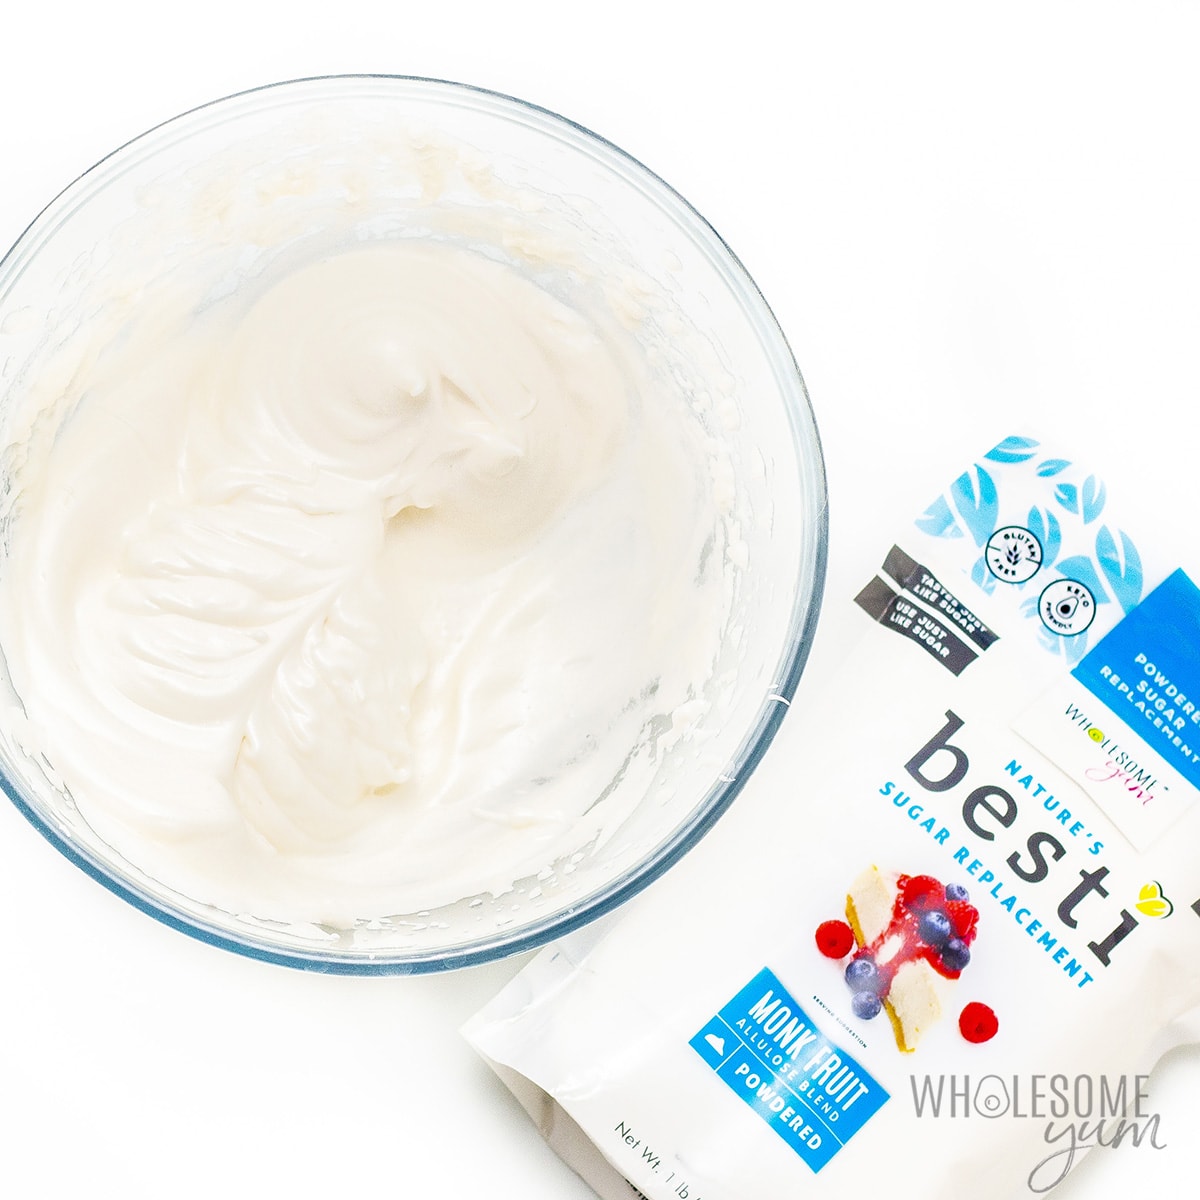 Egg whites whipped with vanilla and Besti.